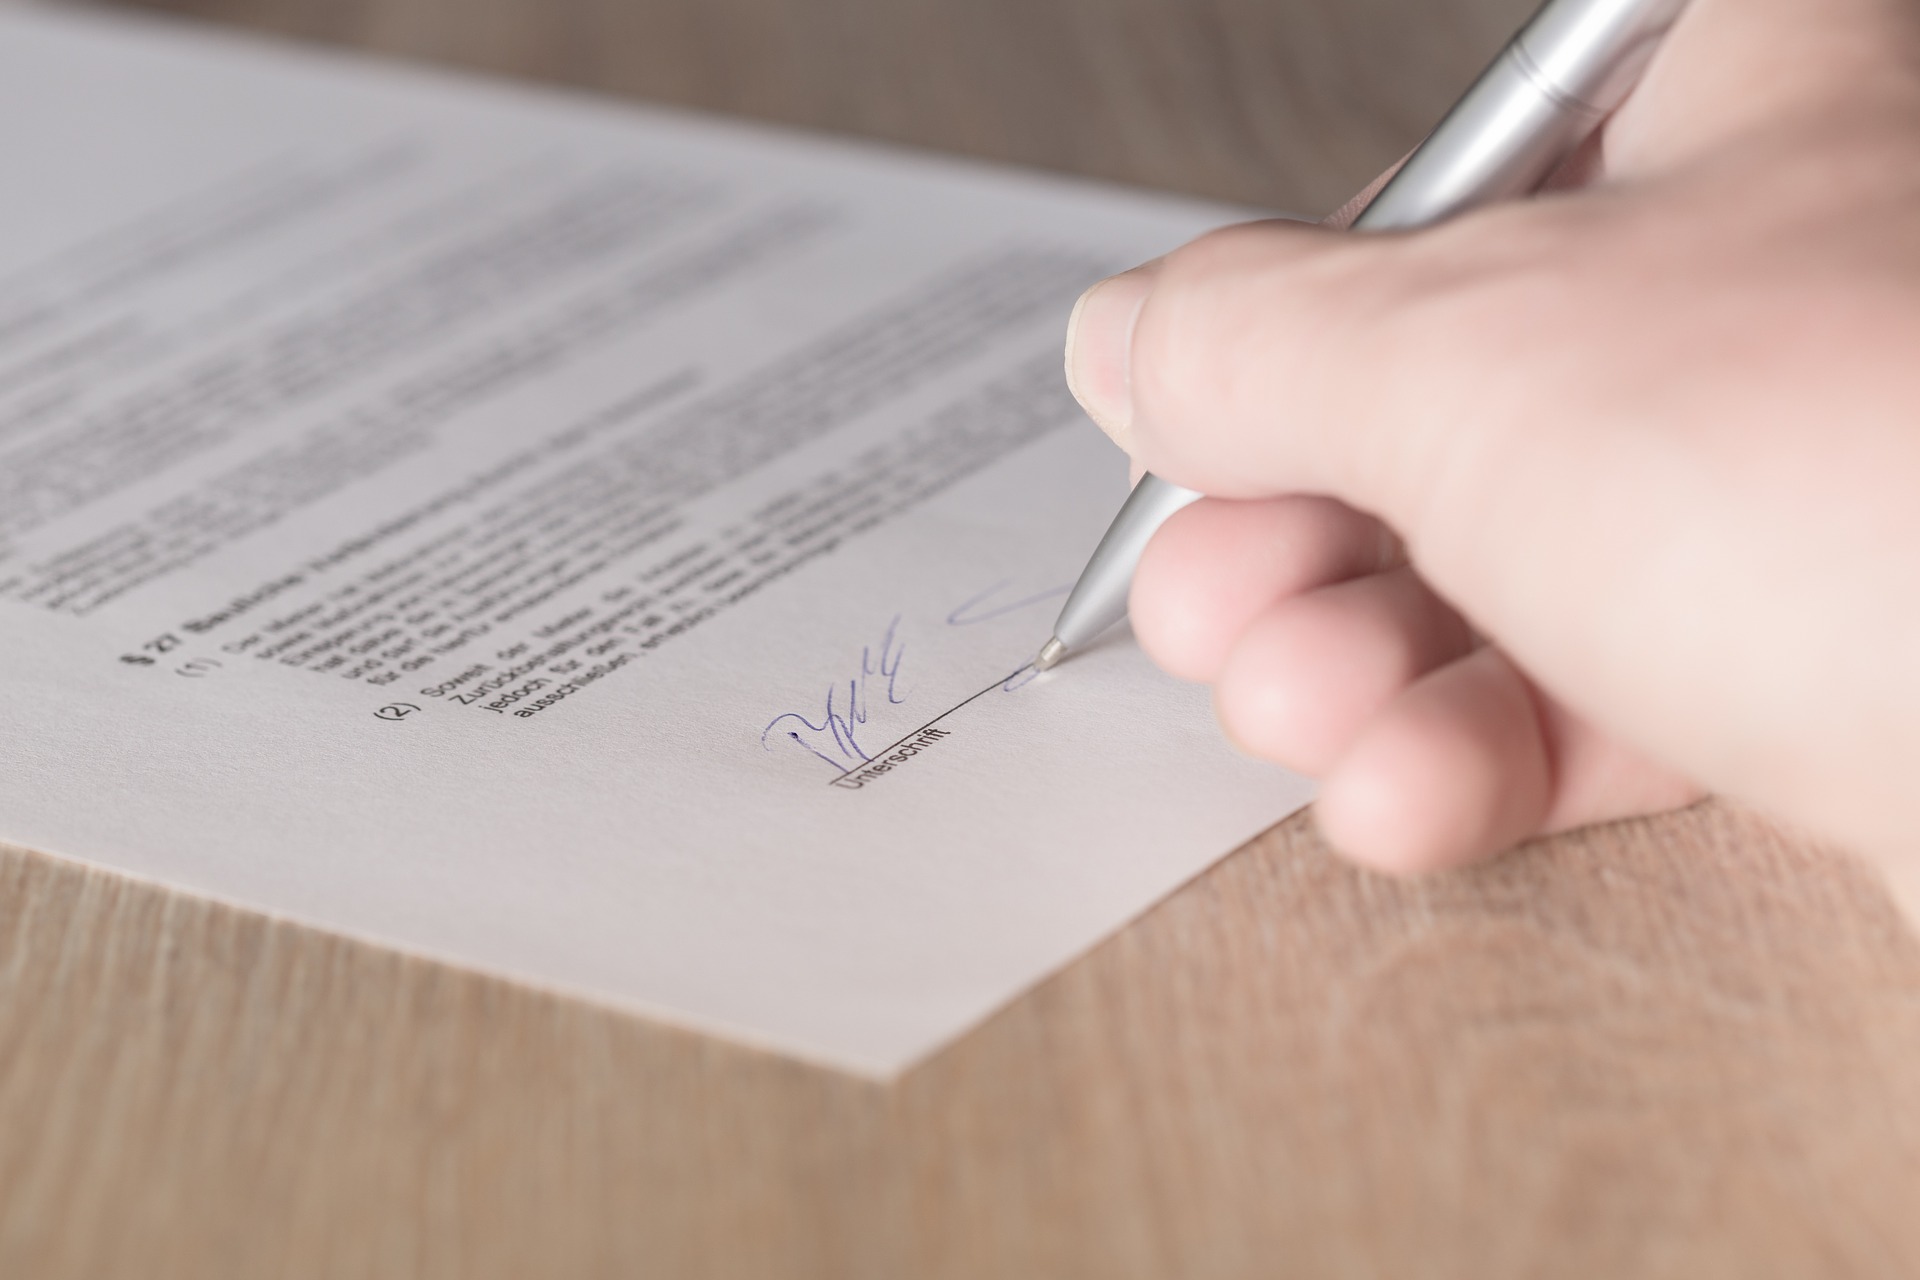 Court review of unfair terms in consumer contracts in the European order for payment procedure